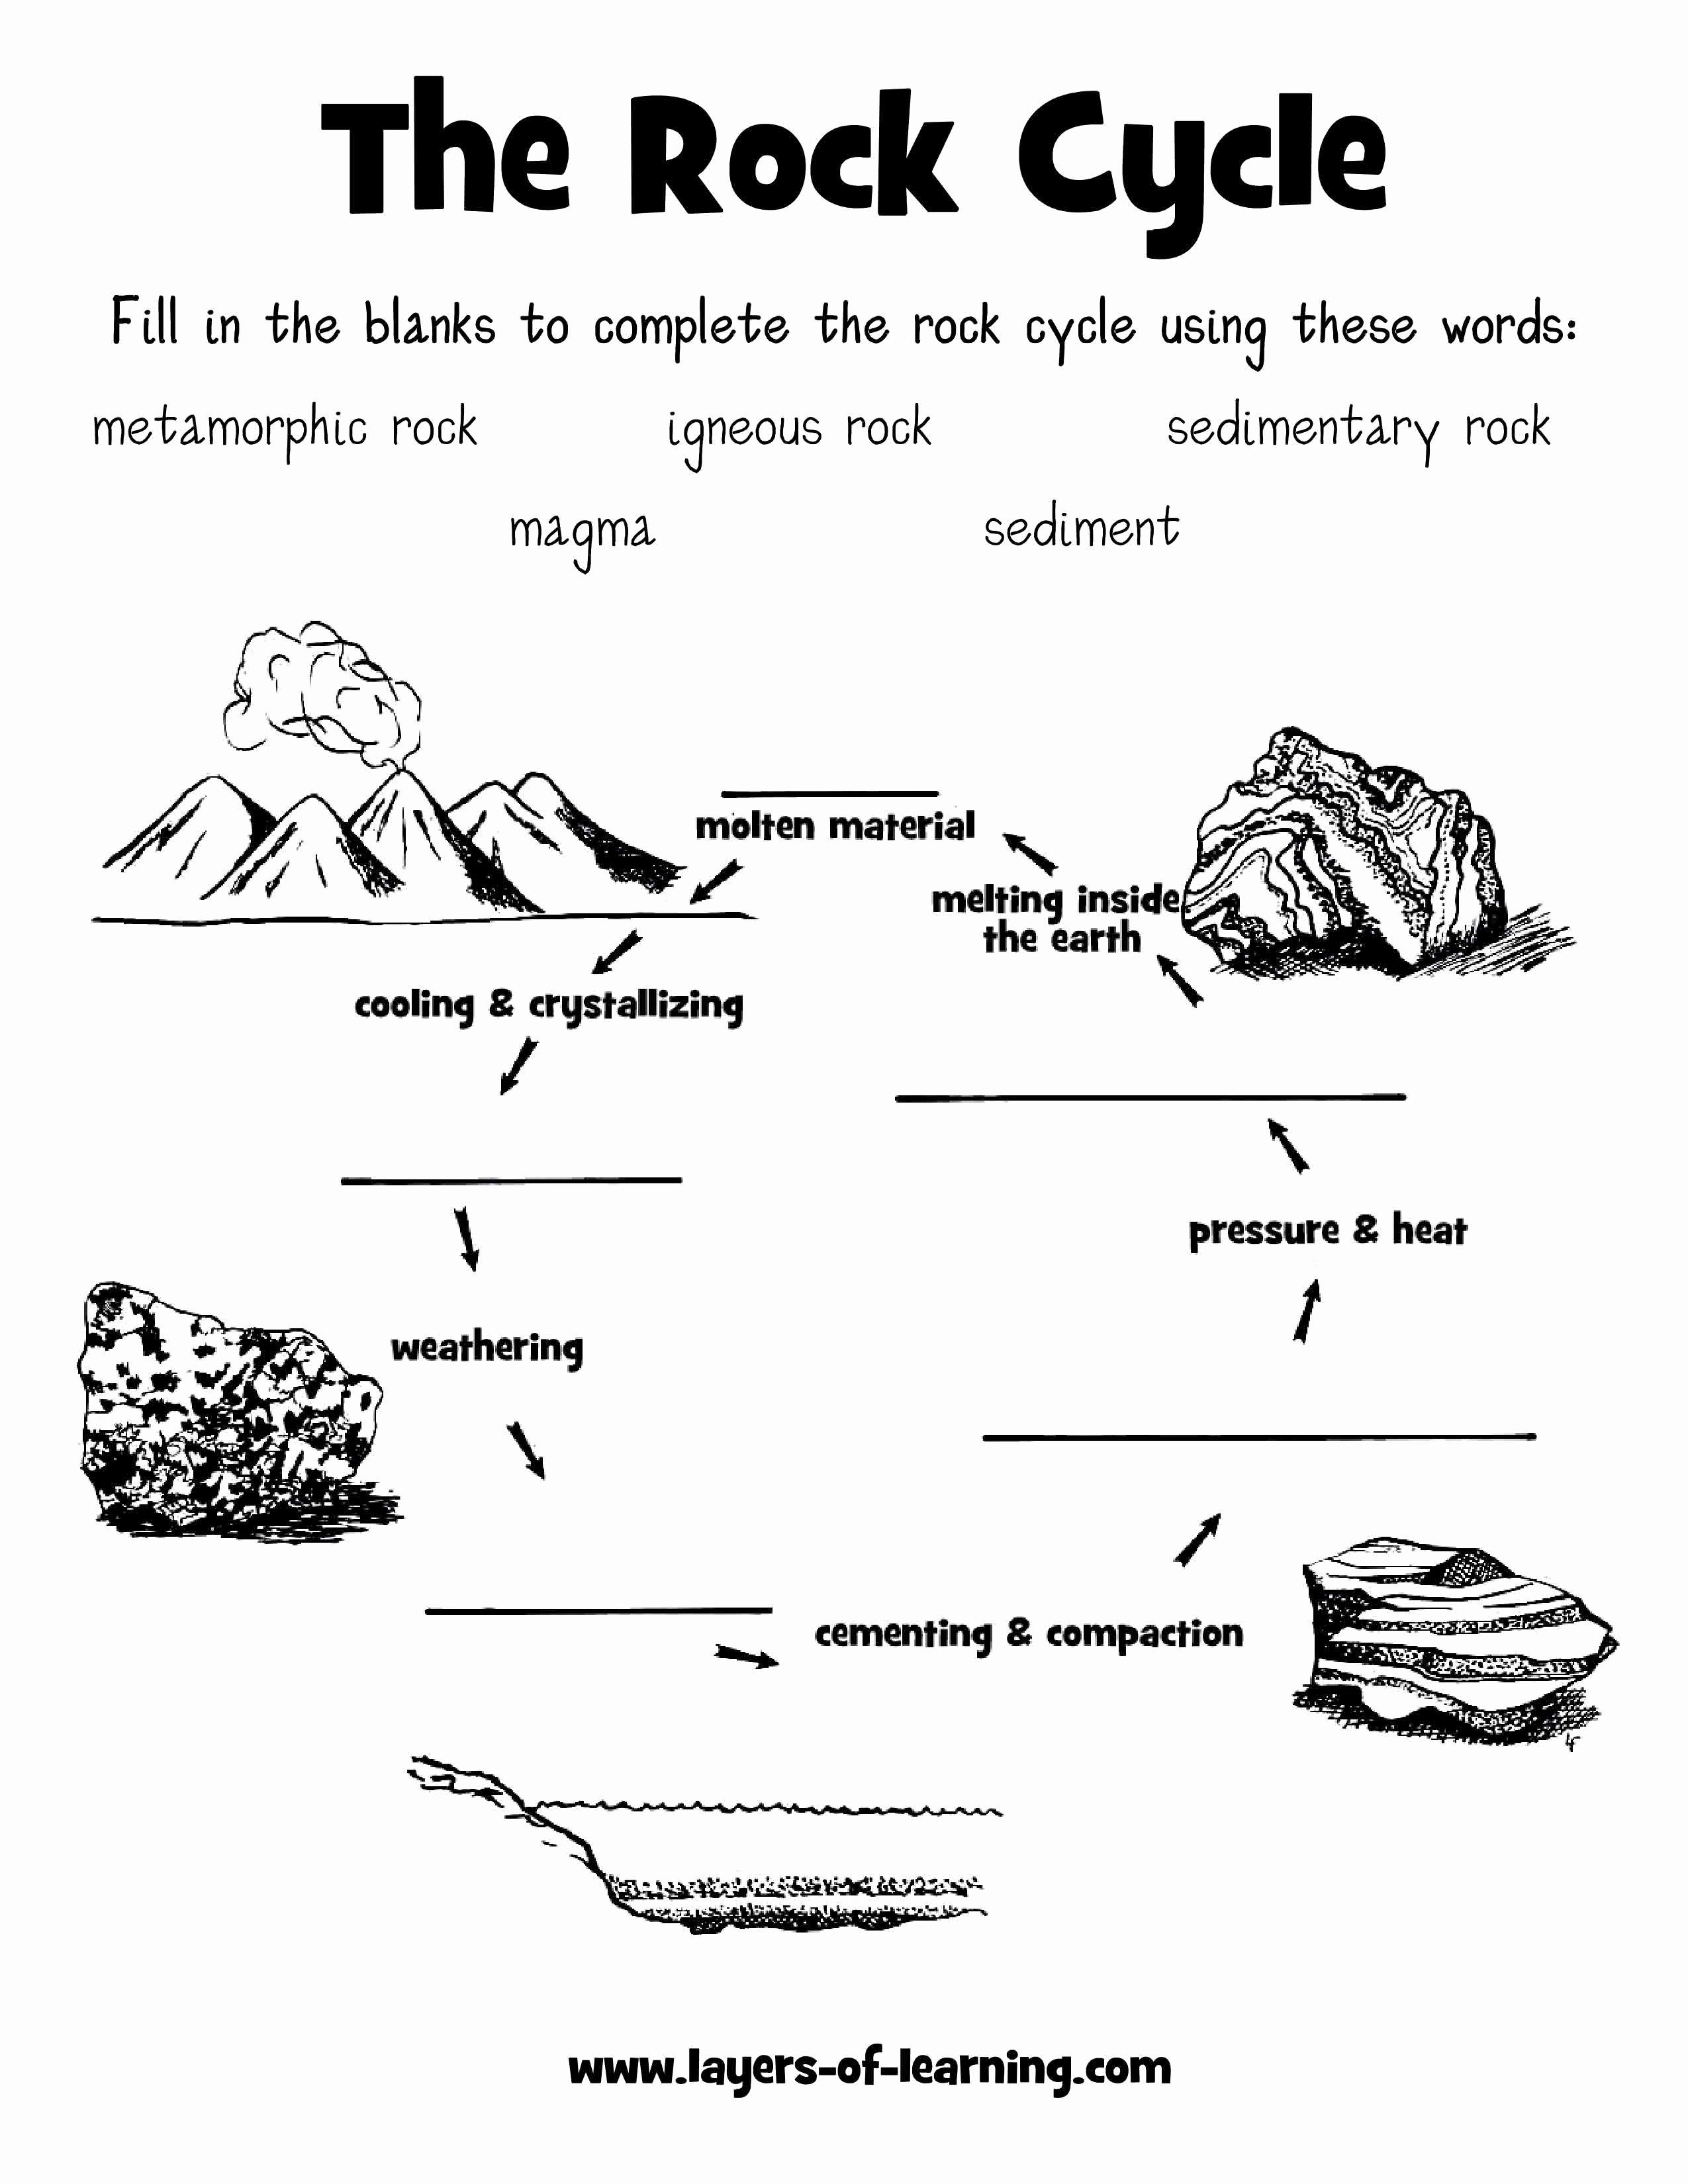 The Rock Cycle Worksheet Lovely Rock Cycle Worksheet Layers Of Learning